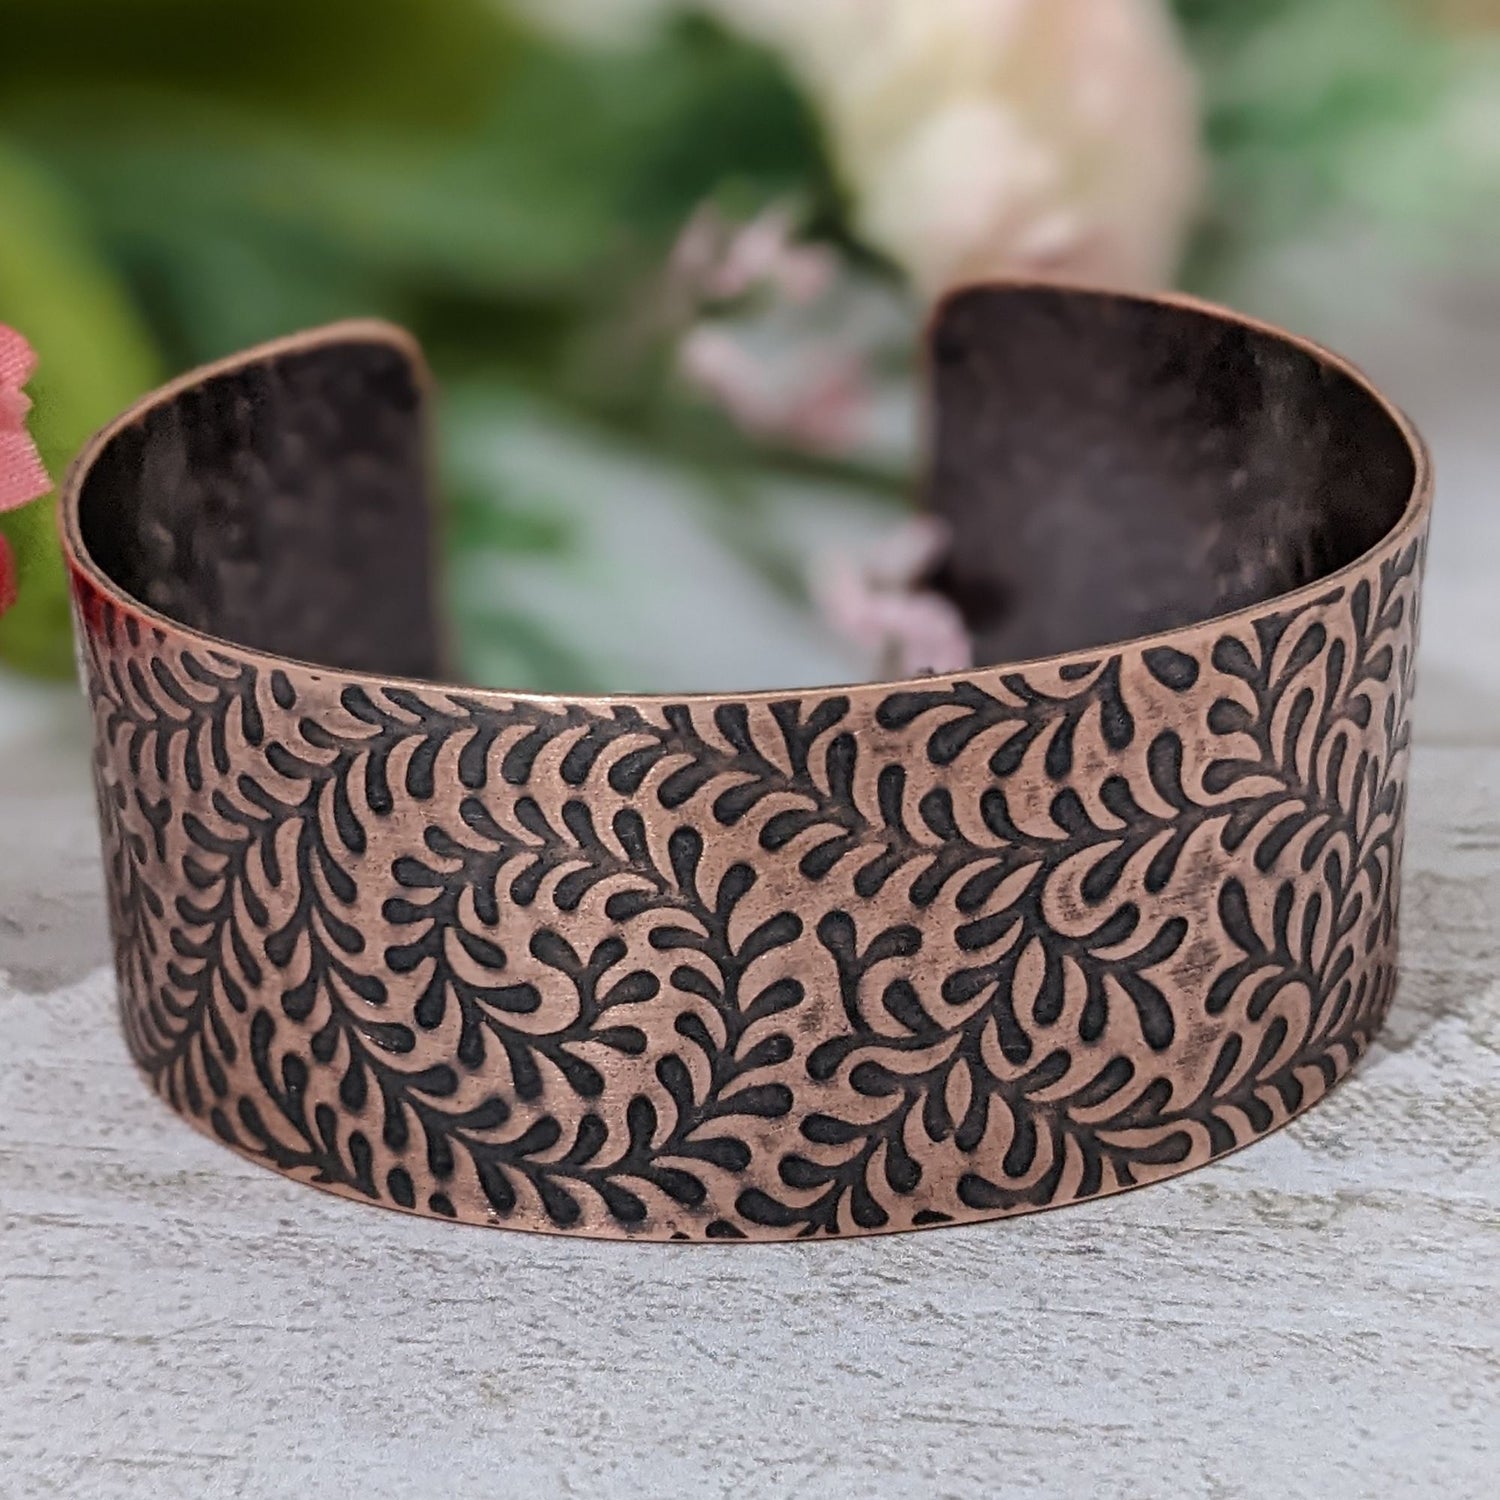 One inch wide copper cuff bracelet with impression design of a fiddlehead fern. The design is abstract. The recessed parts of the design are darkened to accentuate the detail.